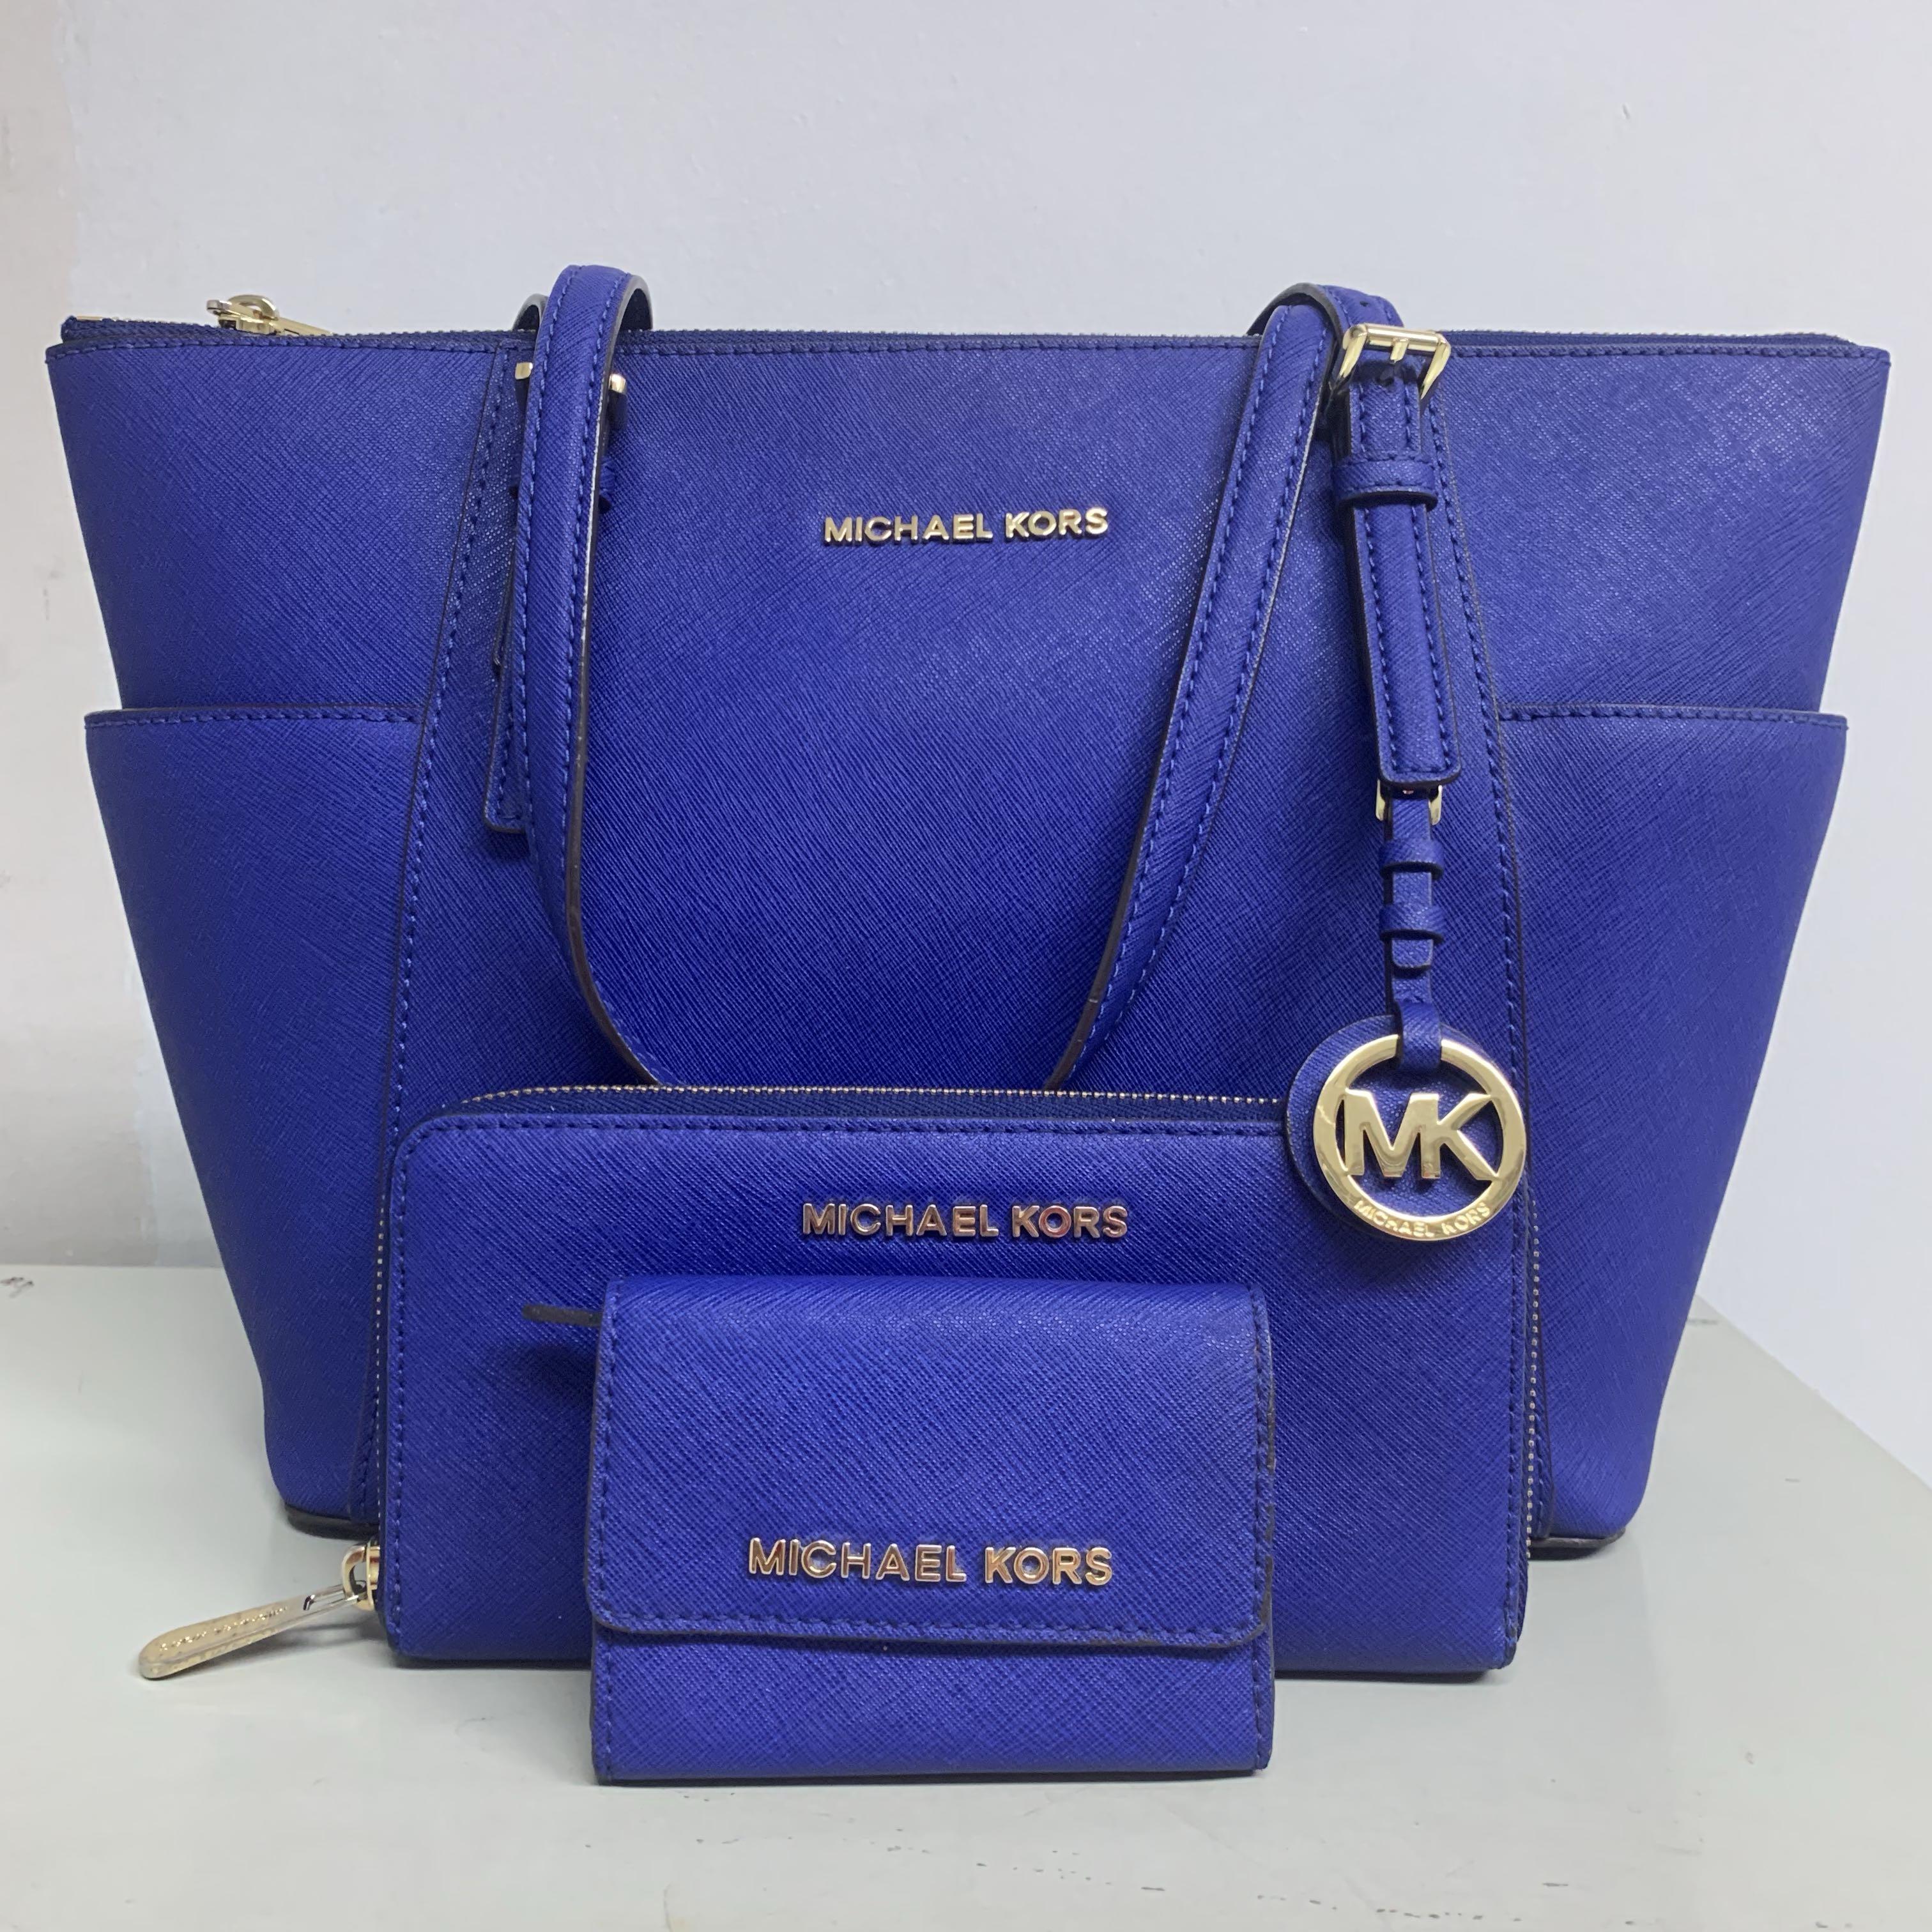 Buy Michael Kors Mercer Small Coin Purse Online India | Ubuy